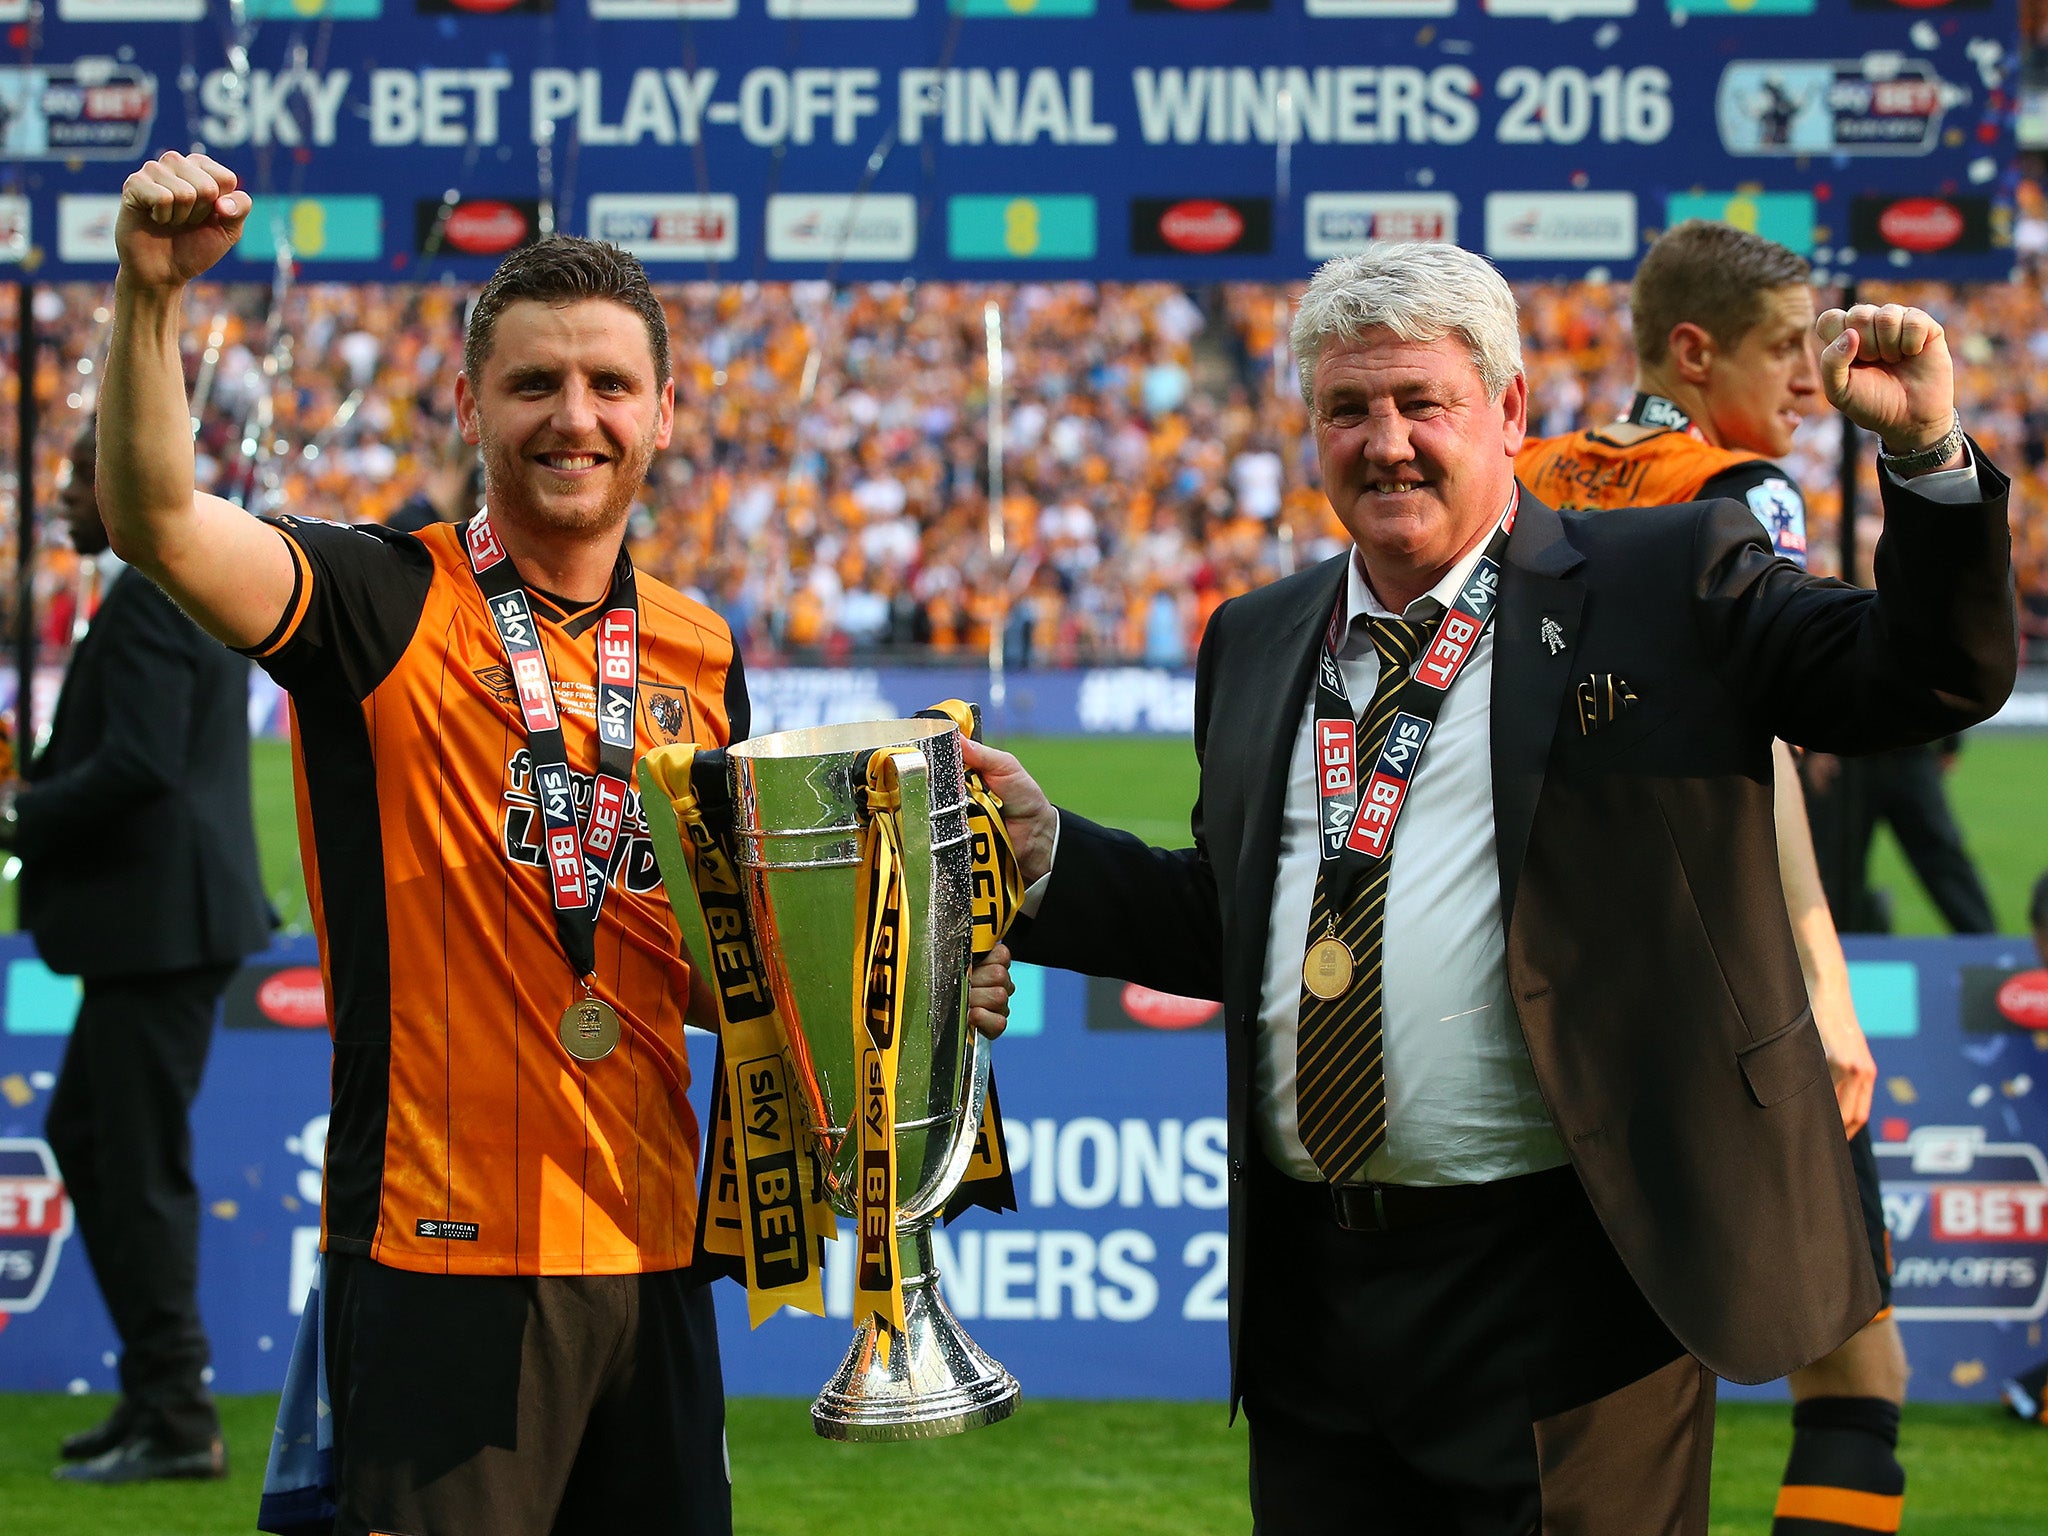 Bruce helped Hull back into the Premier League when managed by his father, Steve, last season